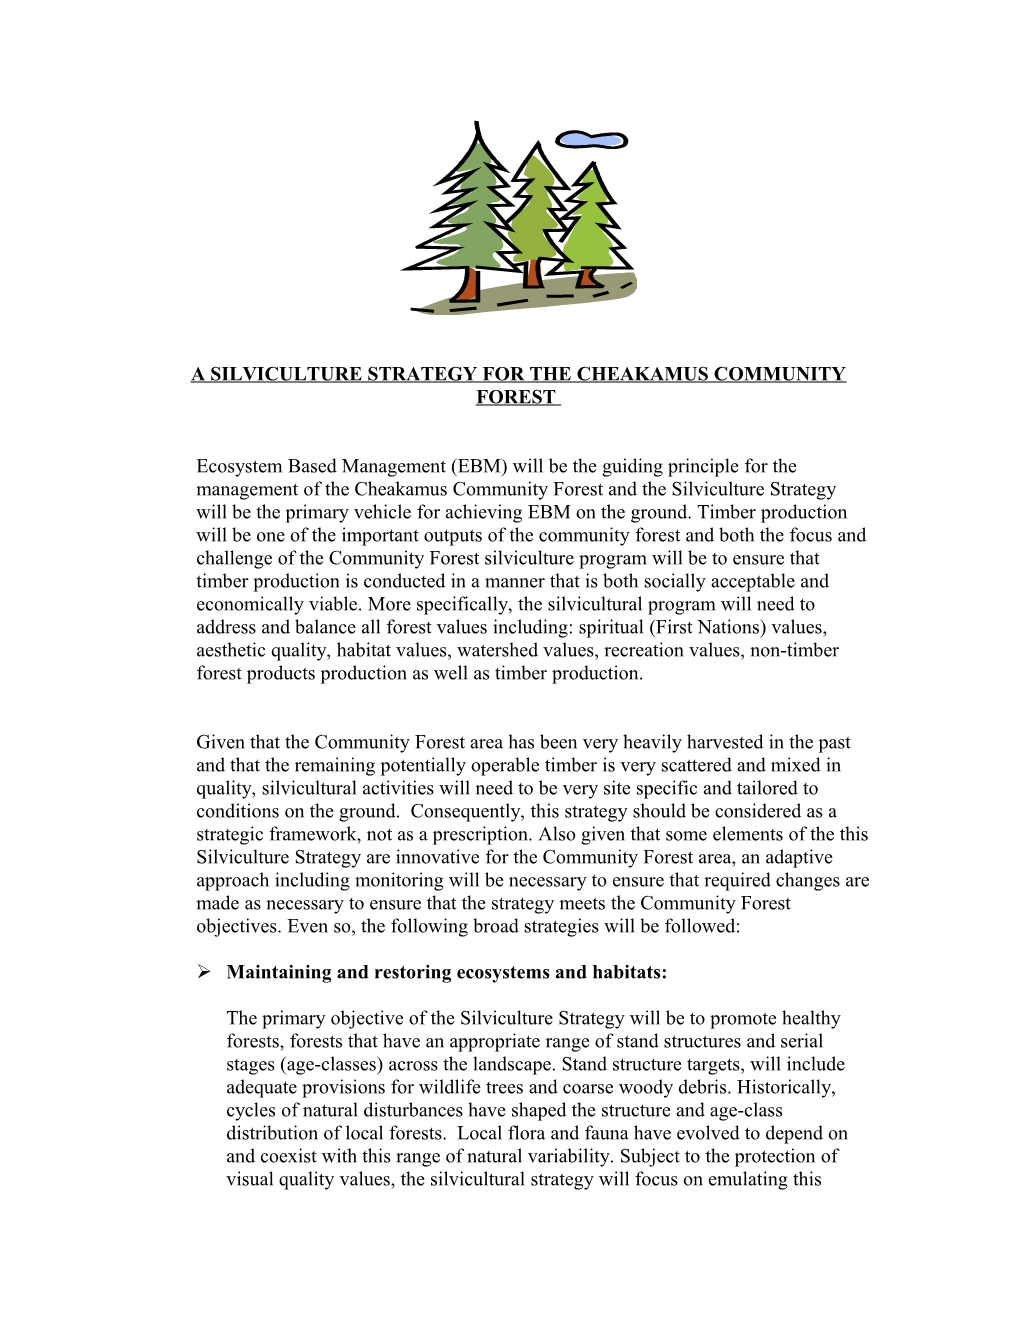 A Silviculture Strategy for the Cheakamus Community Forest